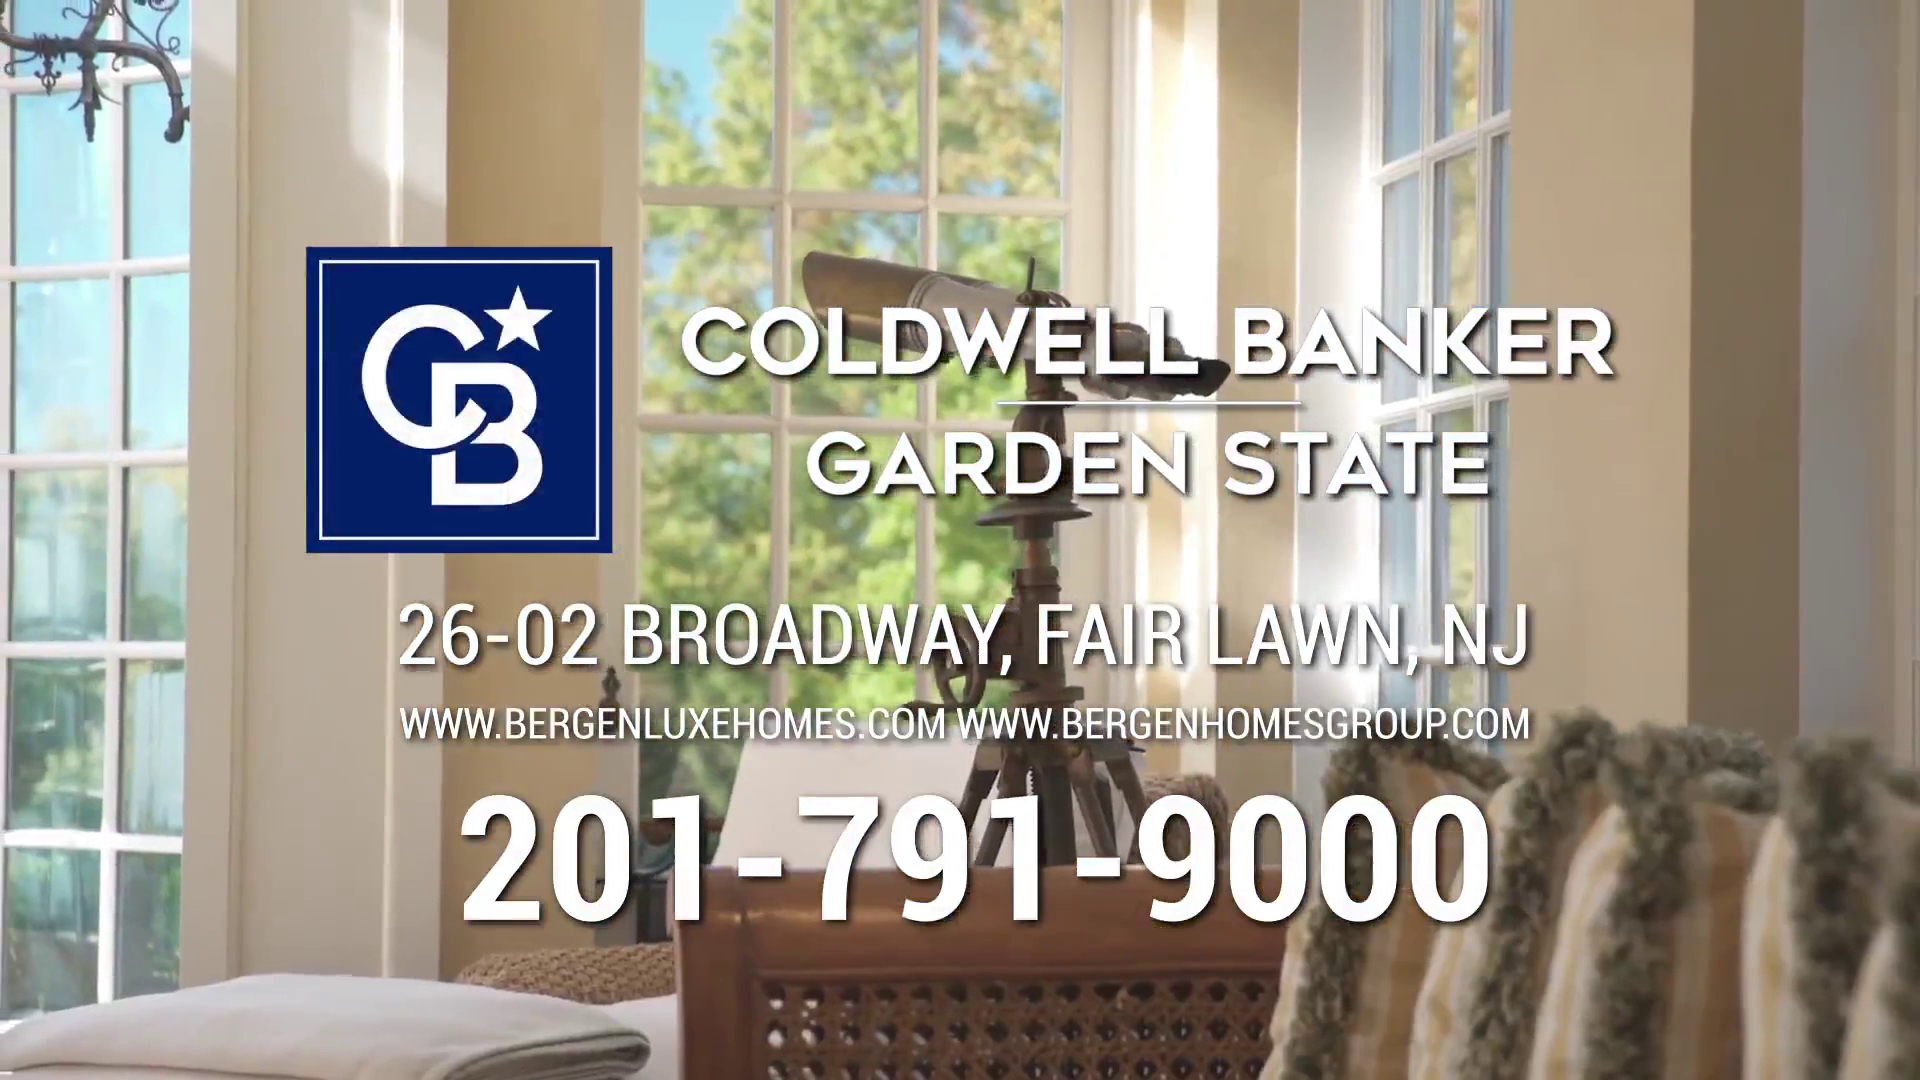 Coldwell Banker Garden State - Real Estate